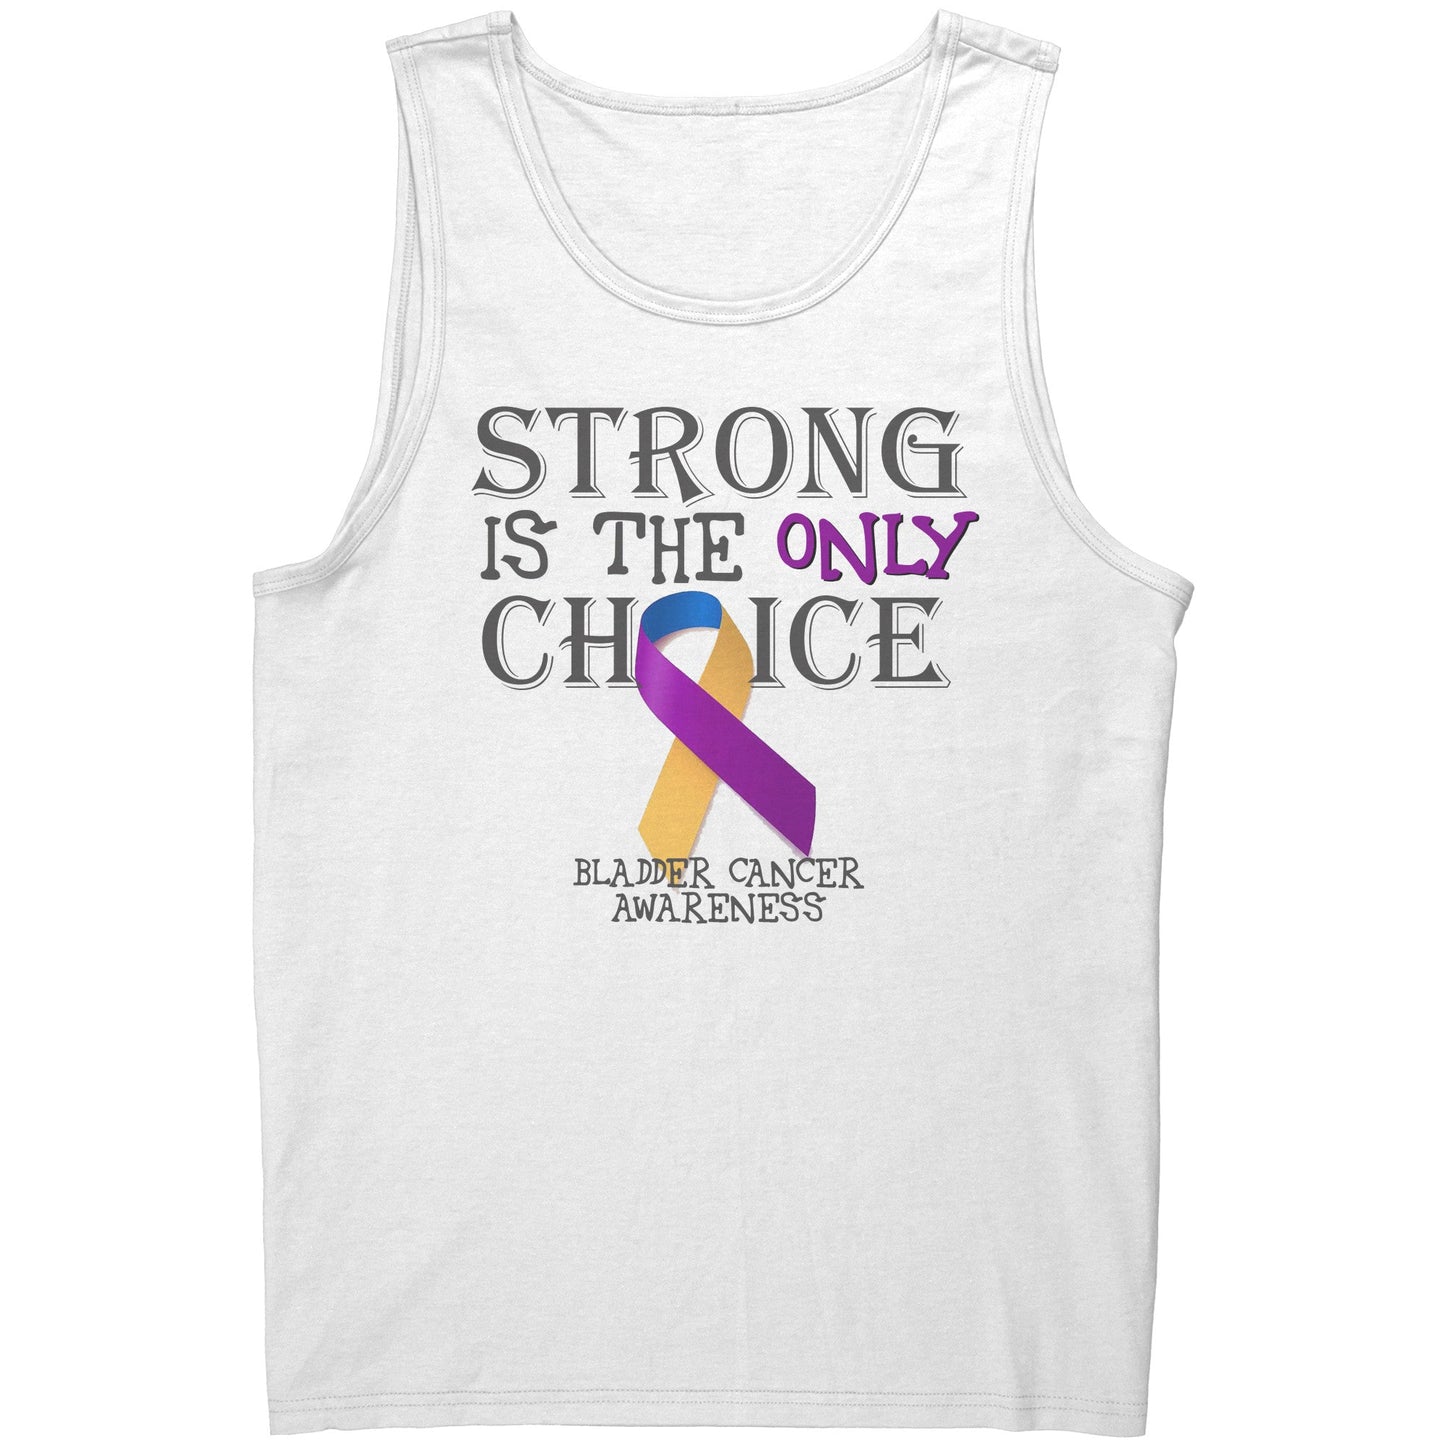 Strong is the Only Choice -Bladder Cancer Awareness T-Shirt, Hoodie, Tank |x|